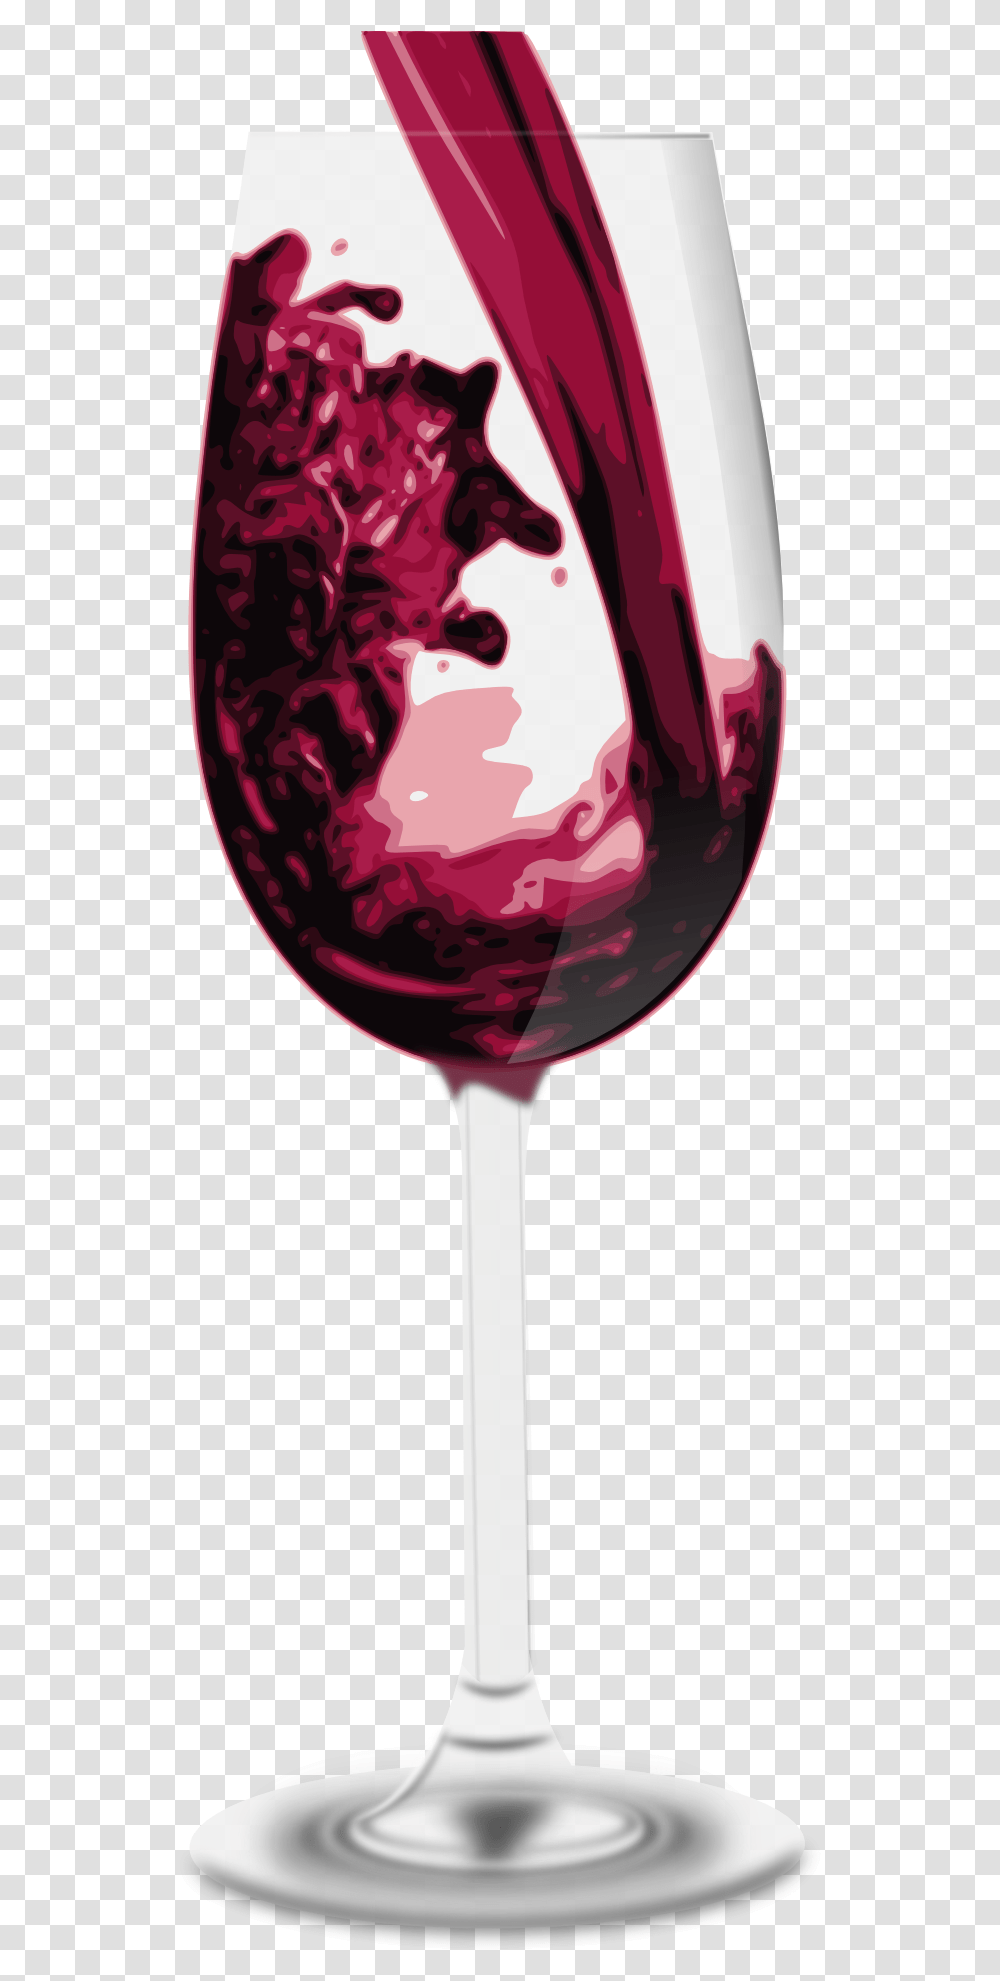 Red Wine In Glass Hd, Alcohol, Beverage, Drink, Wine Glass Transparent Png